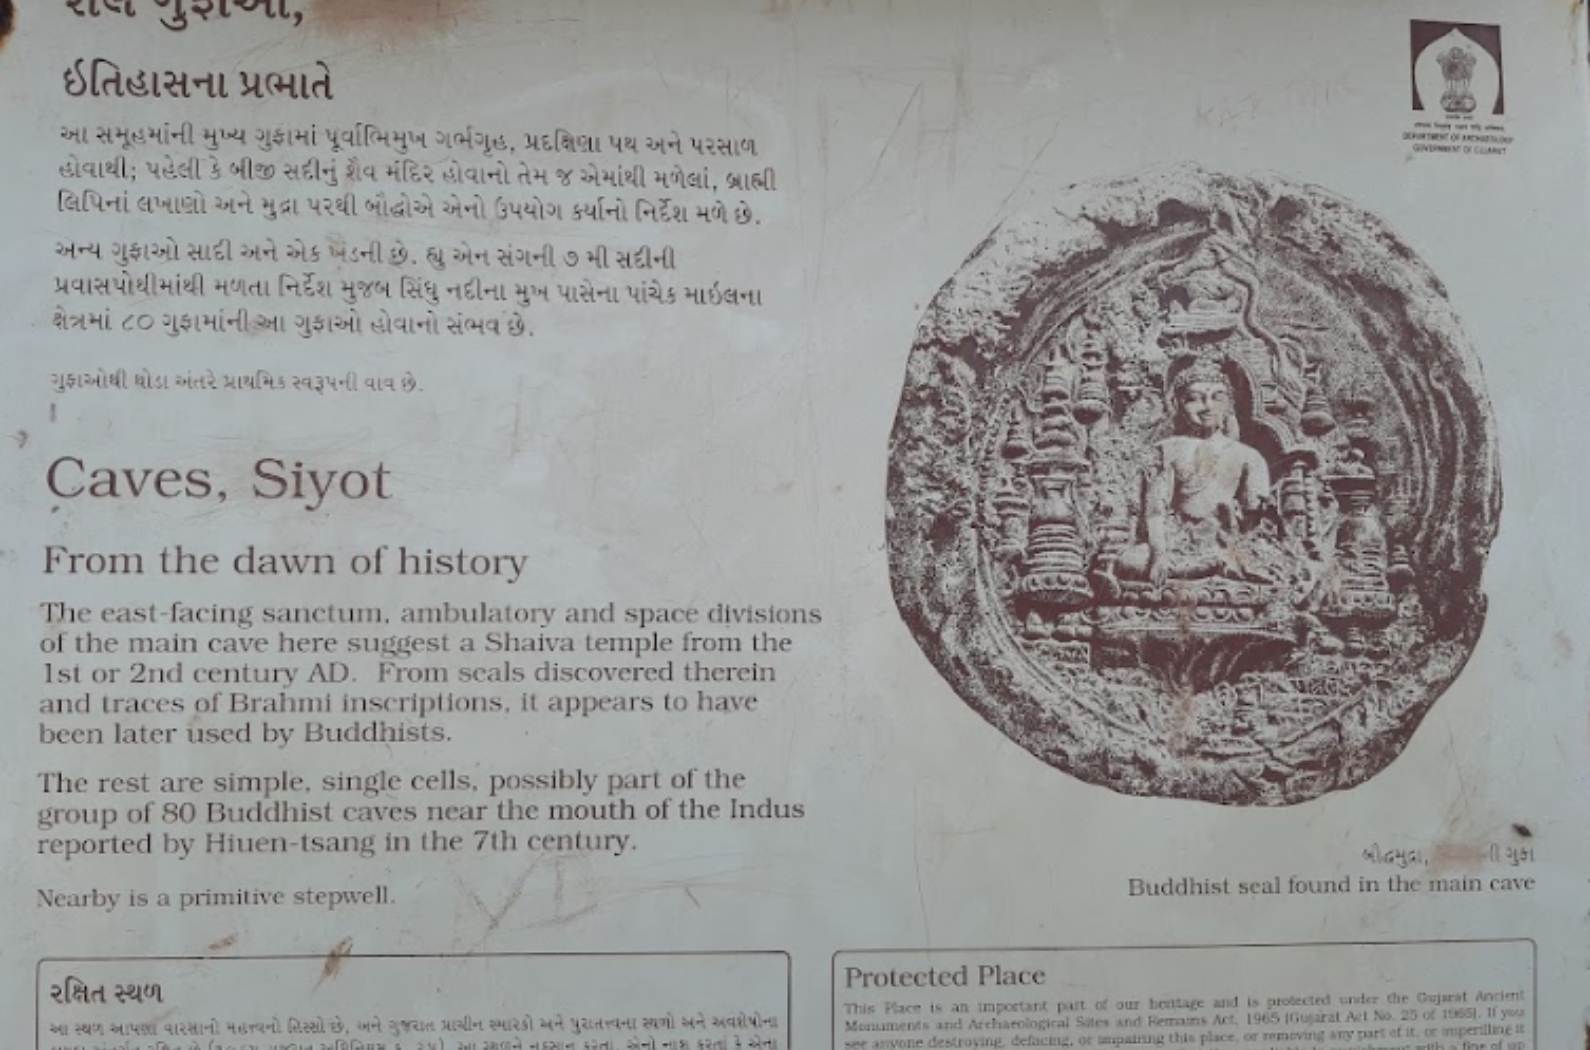 Siyot caves are the caves of Buddhists. Which can be concluded based on the Brahmi inscription.